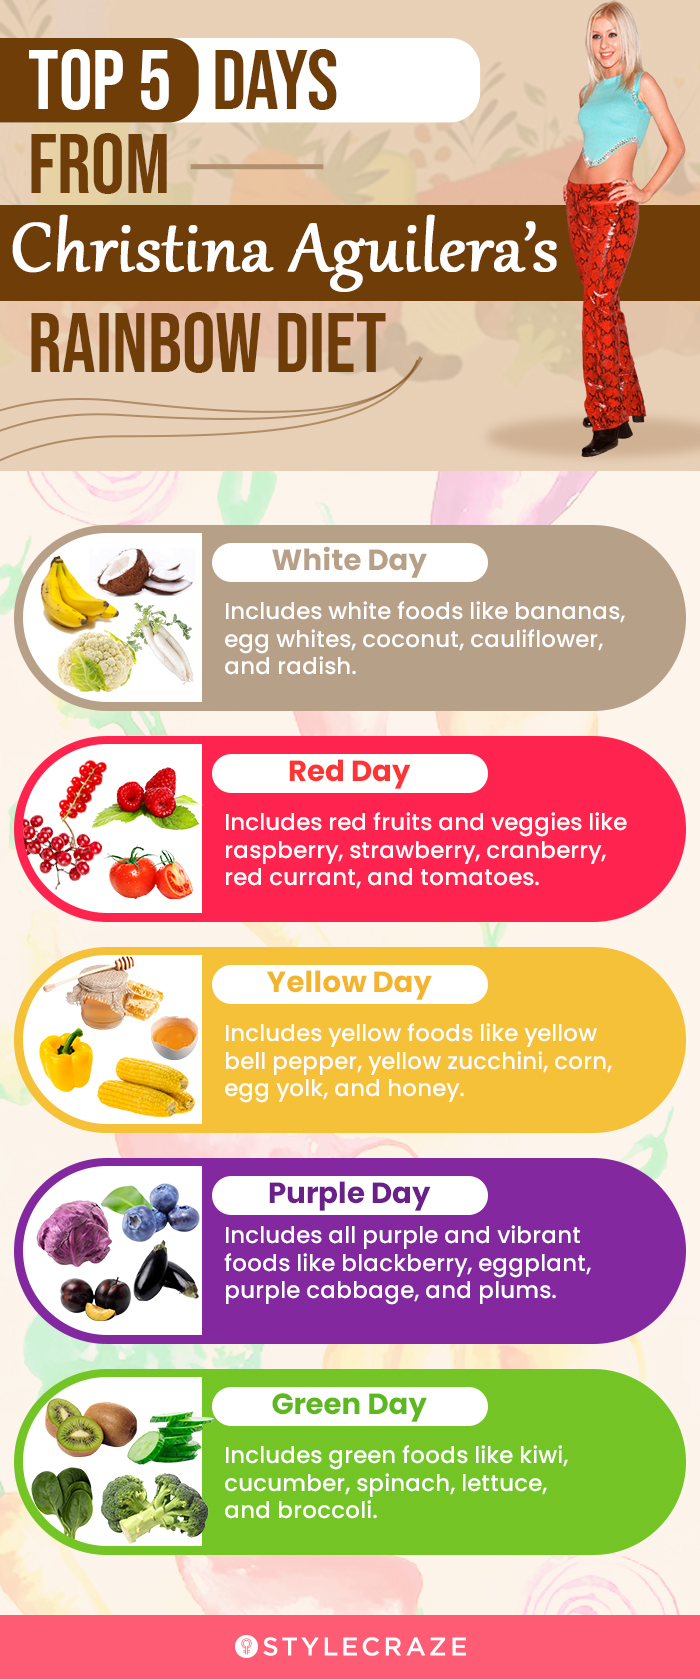 top 5 days from christina aguilera’s rainbow diet (infographic)